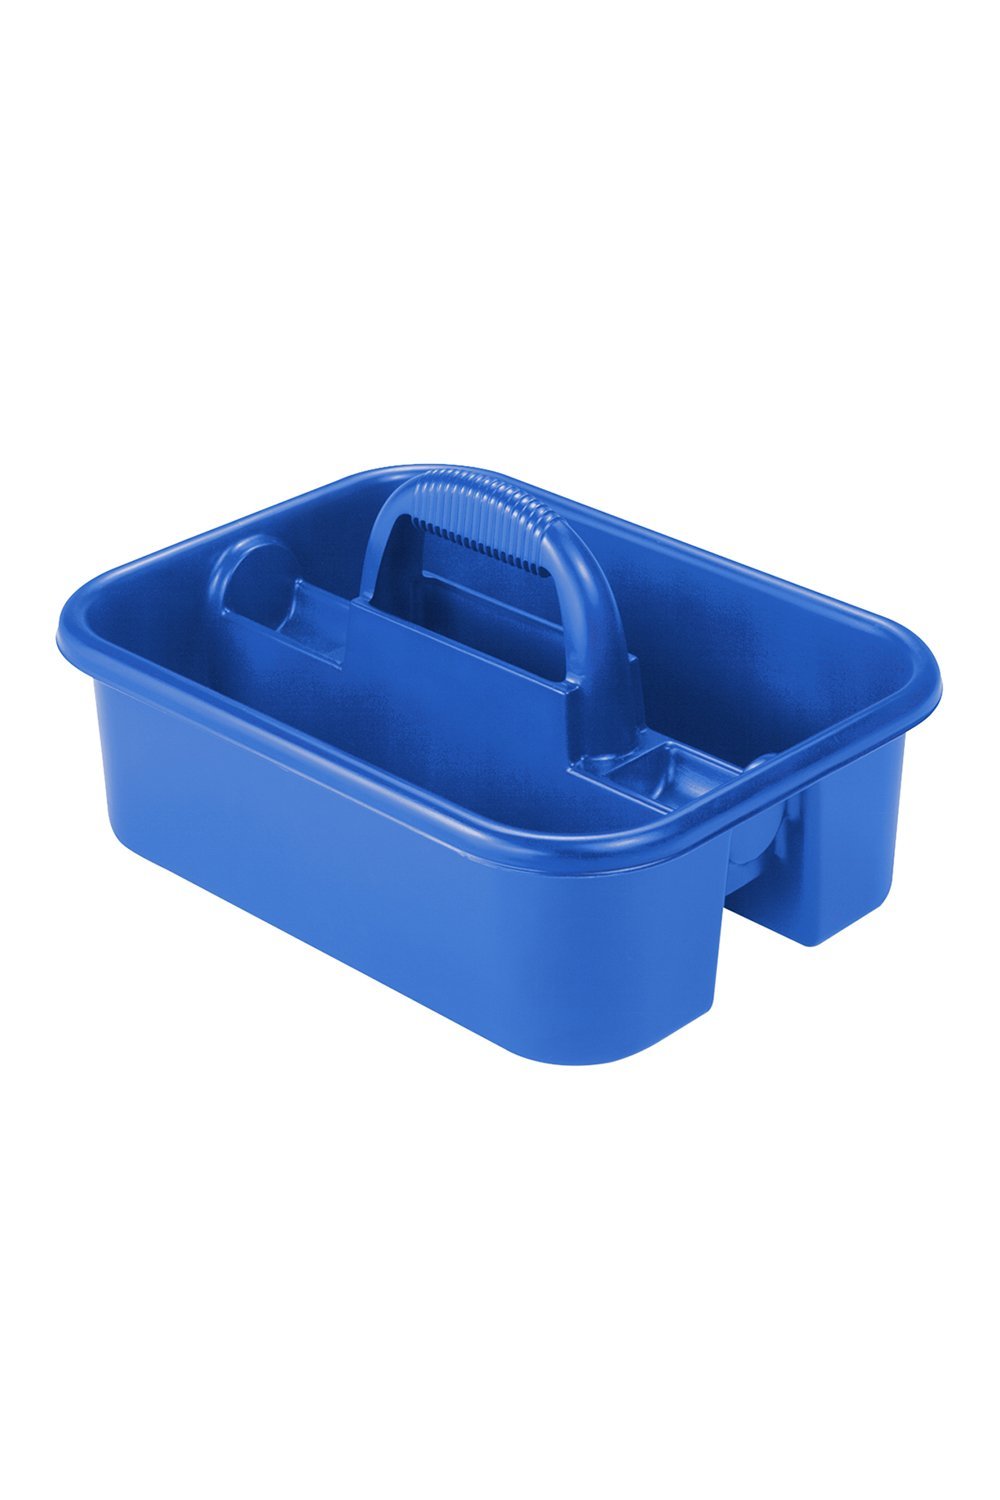 Tool Caddy Bins & Containers Acart 